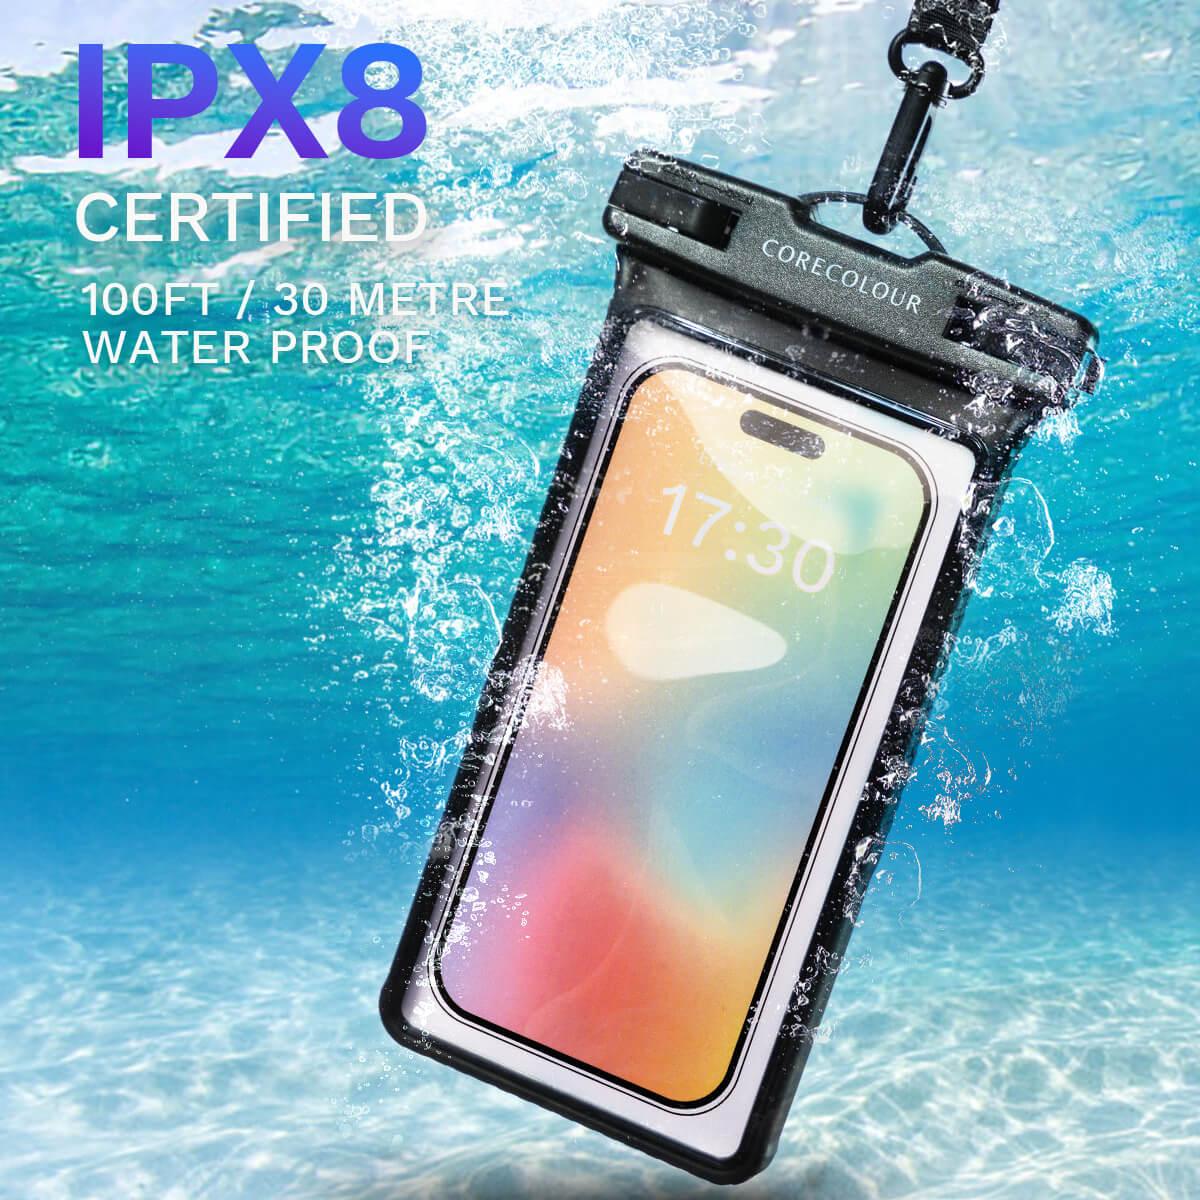 Black IPX8 Certified Water Proof Bag with Lanyard - CORECOLOUR